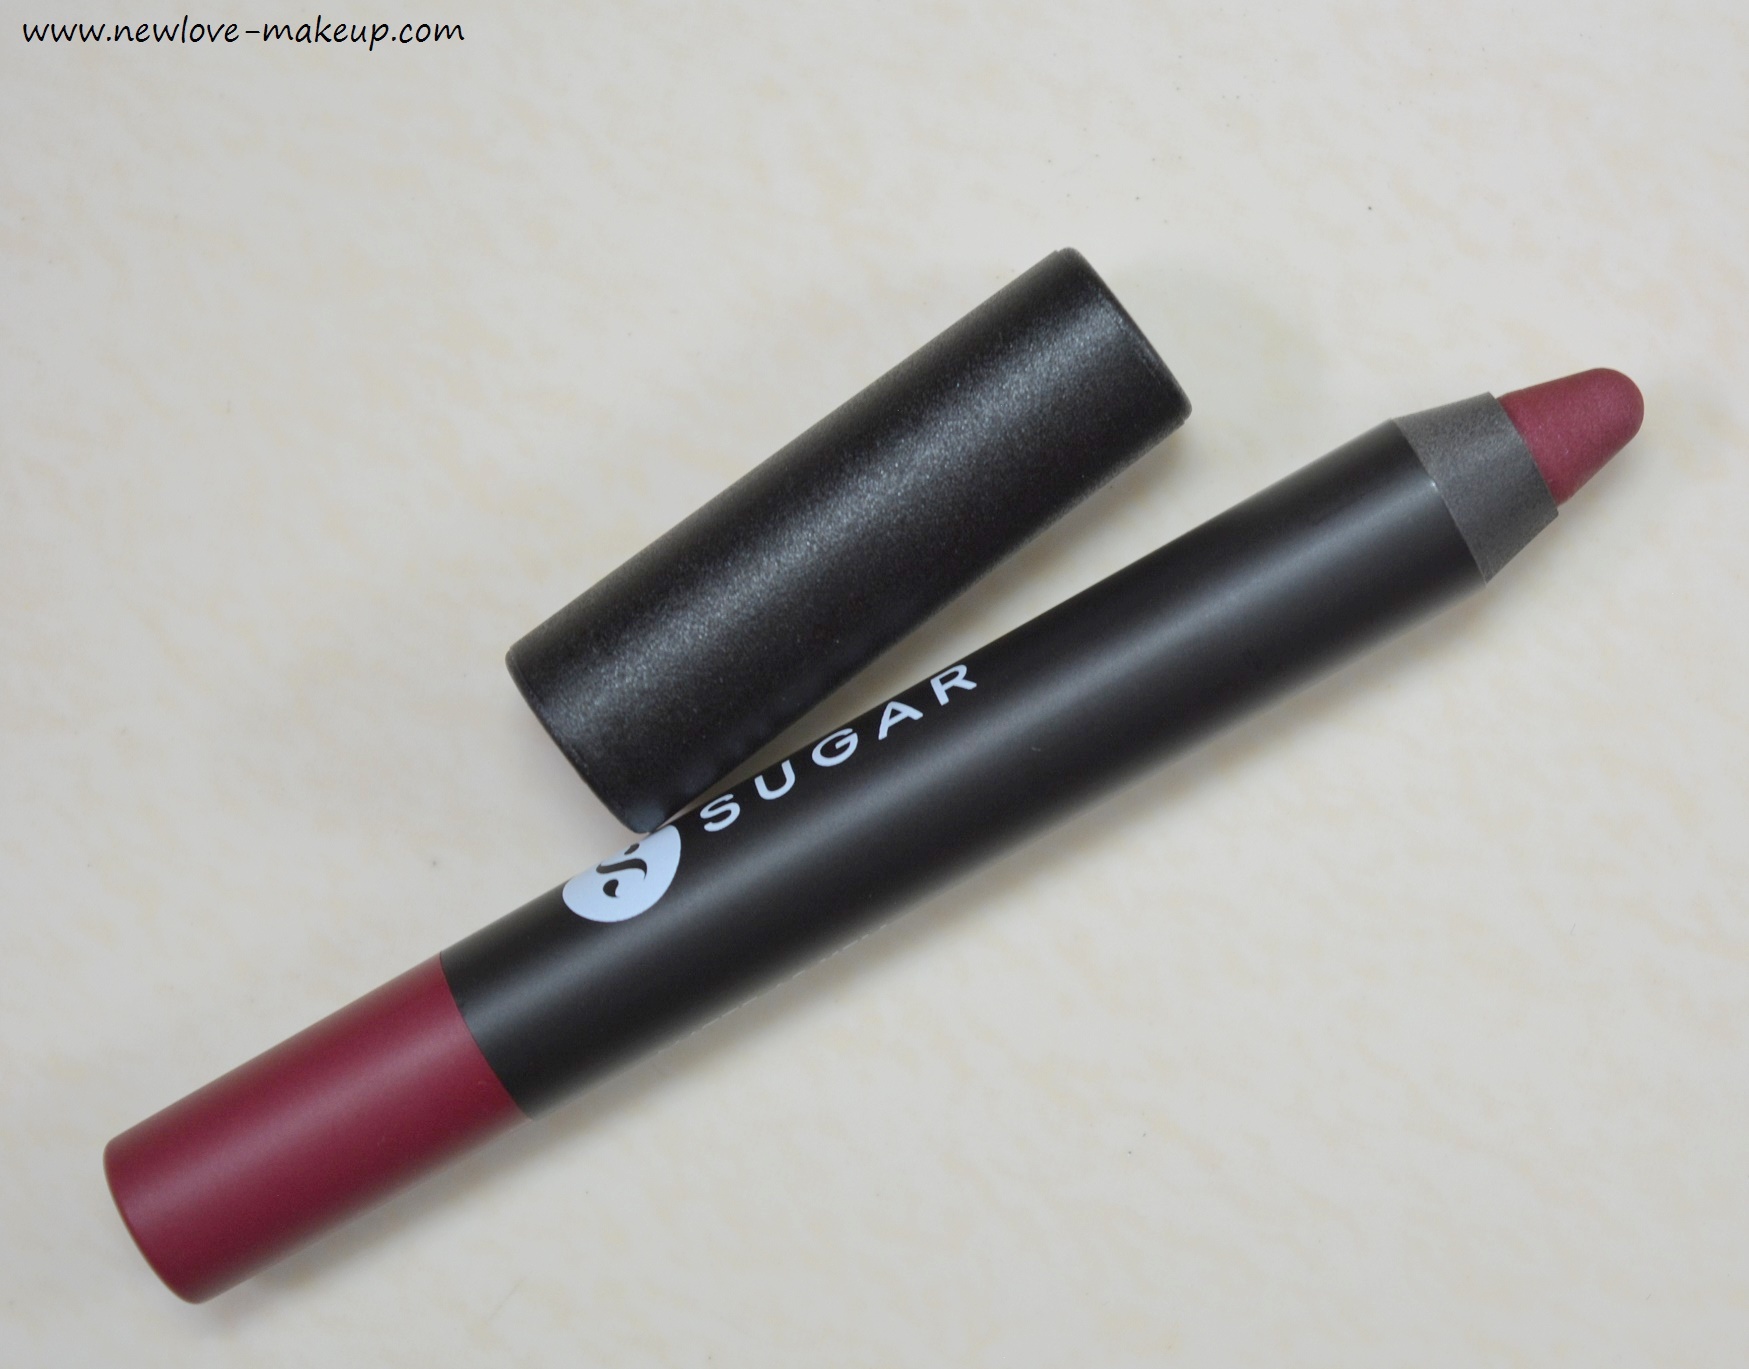 Sugar Cosmetics Matte As Hell Lip Crayon Poison Ivy Review, Swatches - New  Love - Makeup